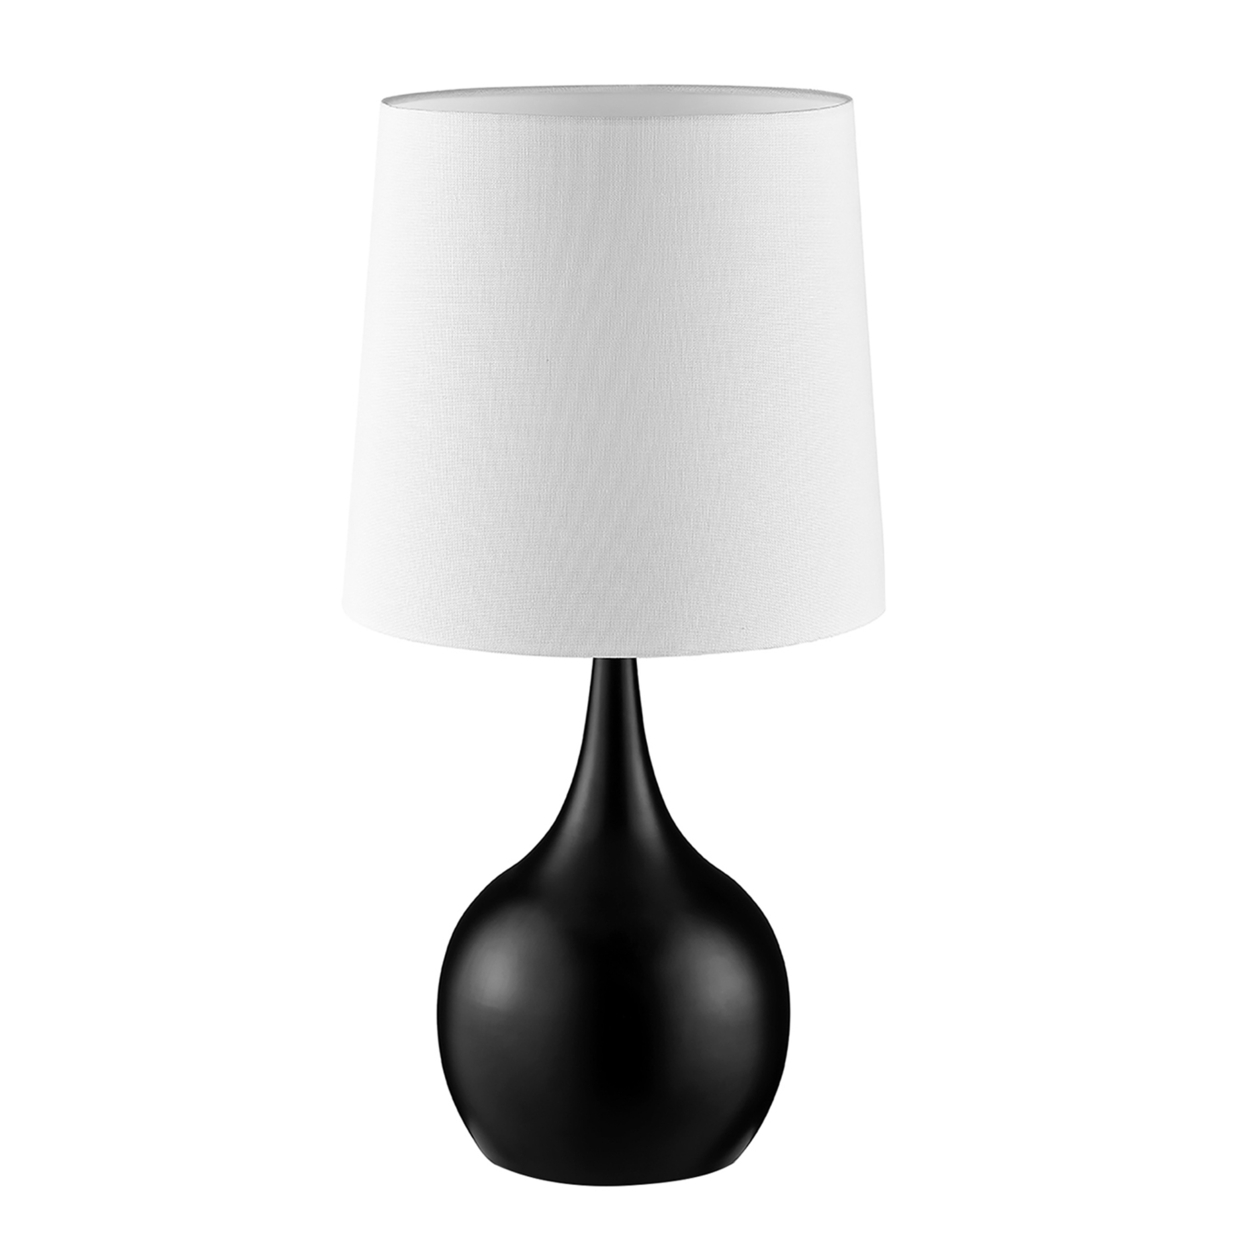 Table Lamp With Metal Base And Touch Sensor, White And Black- Saltoro Sherpi